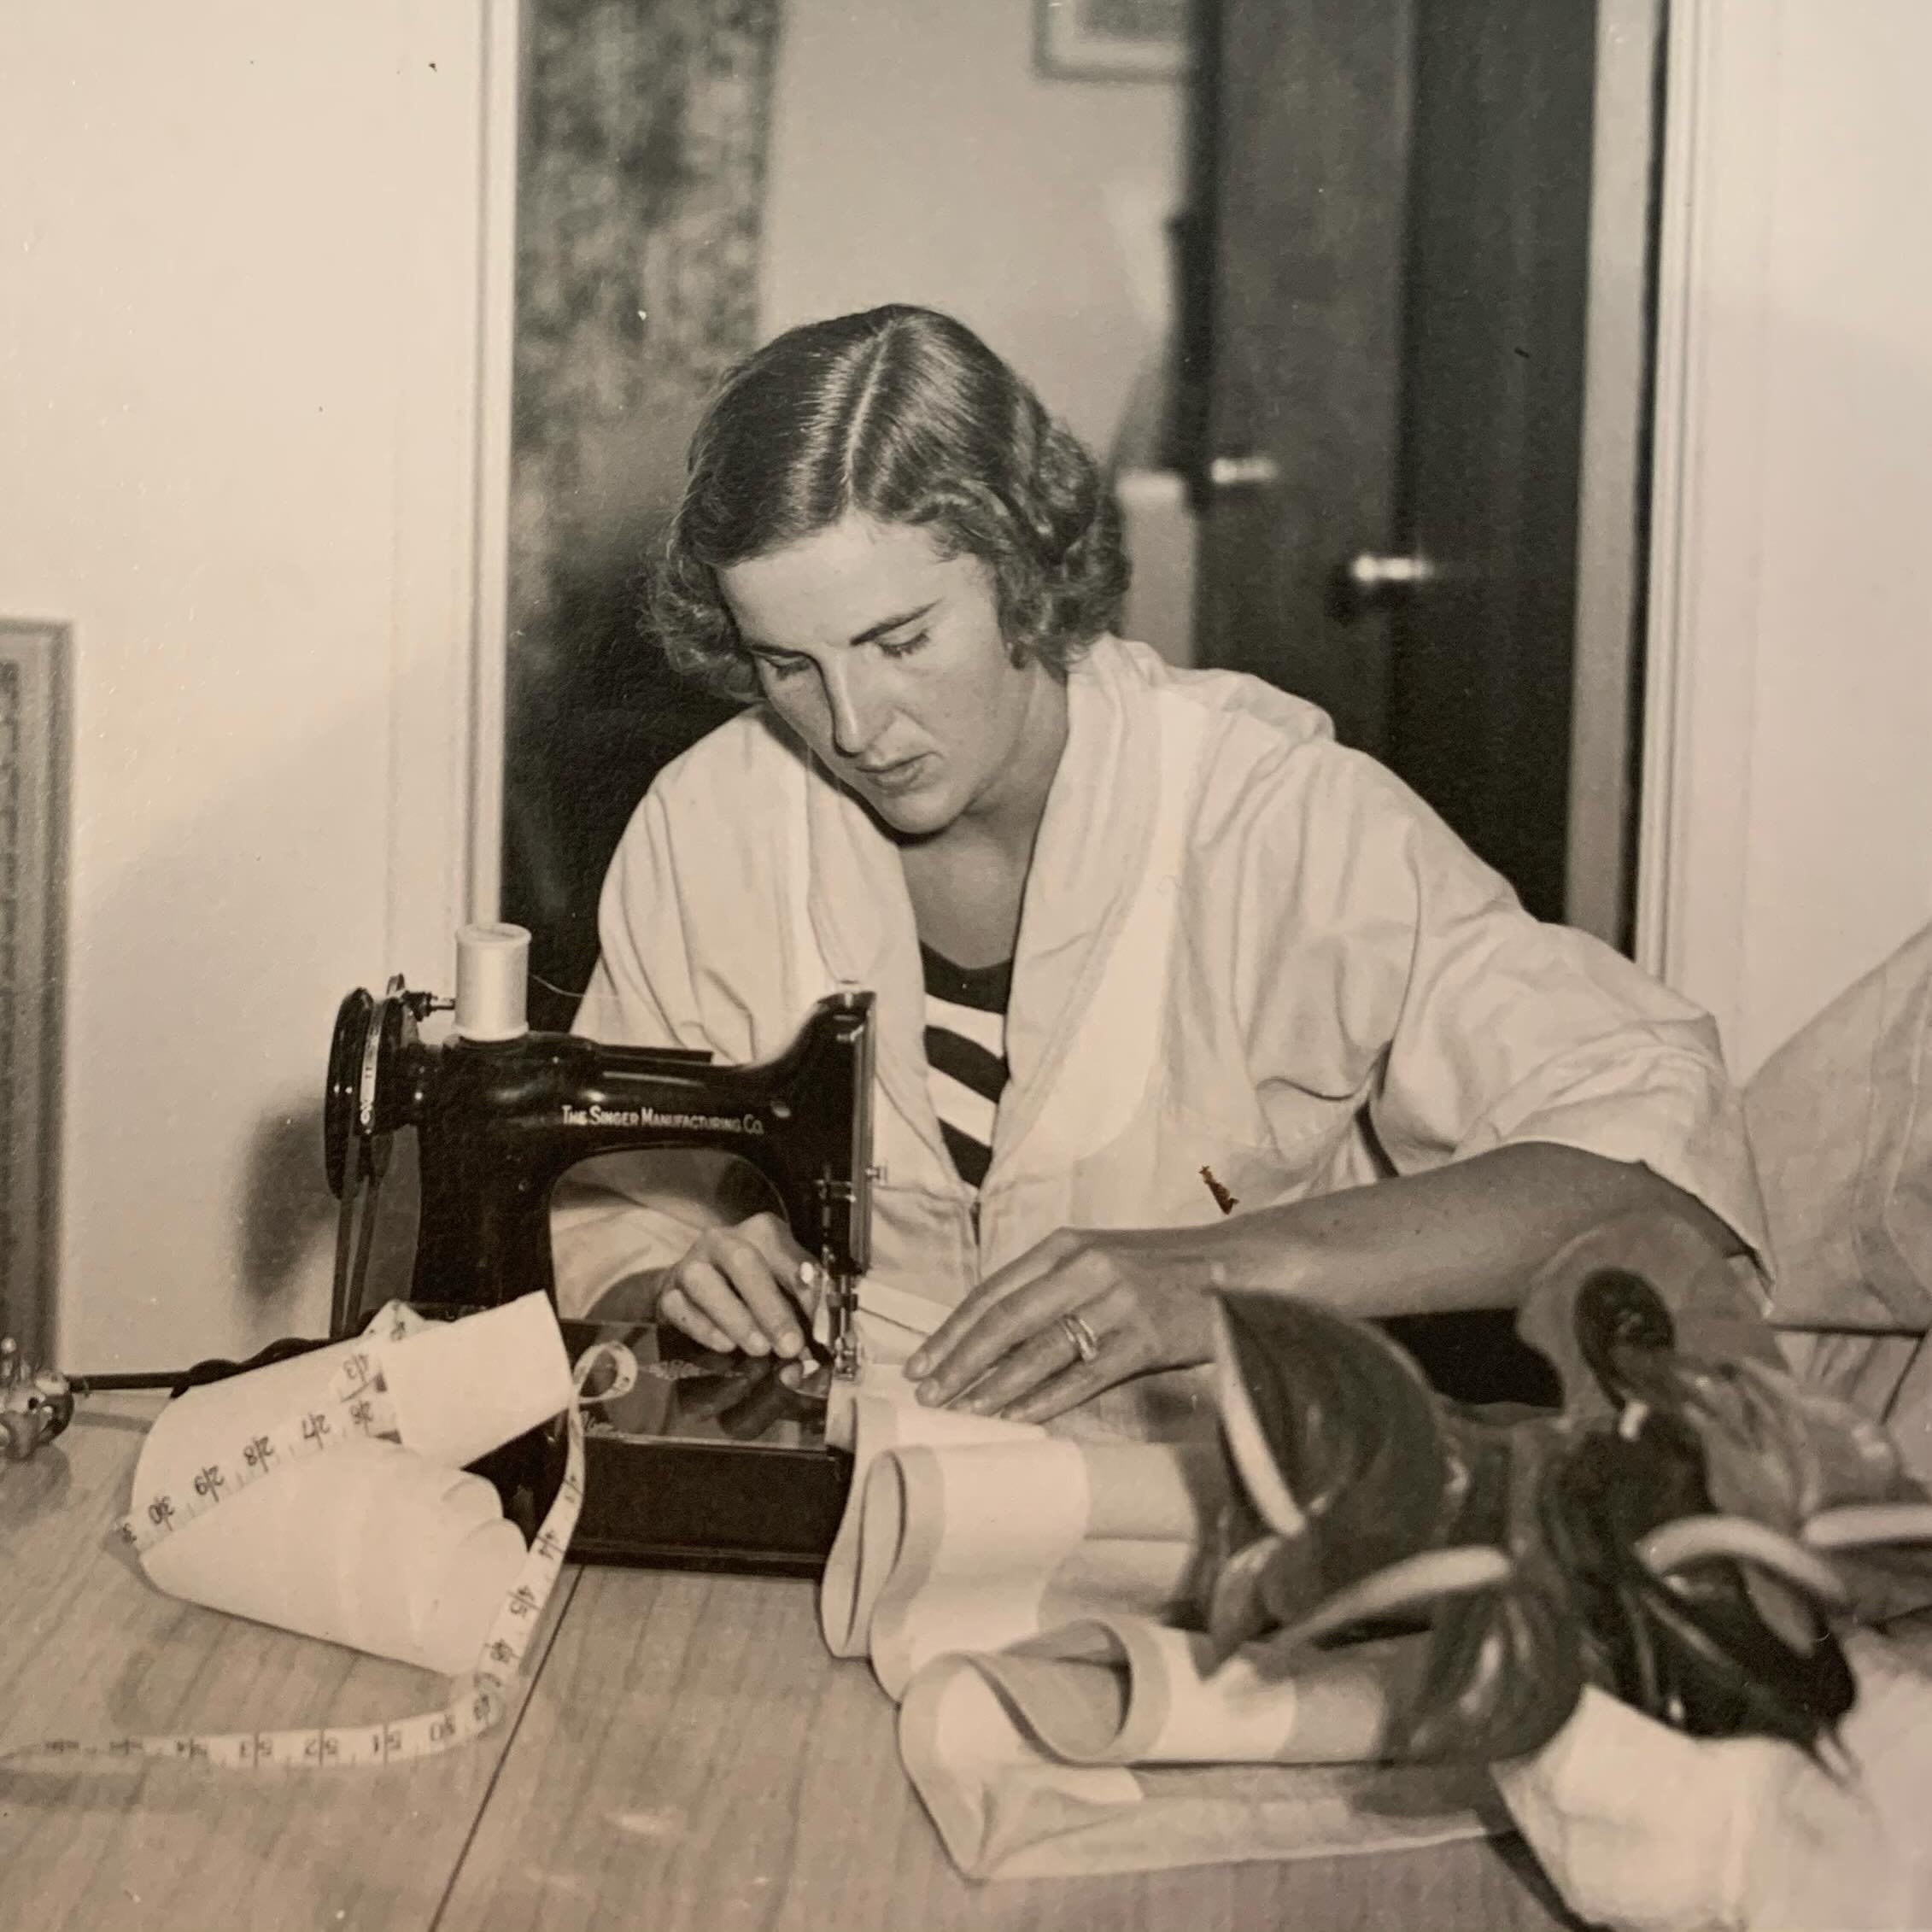 Moms&mdash;you may not realize when you teach and/or model things for your children that you'll have a lifelong influence, but you just might. My mom was passionate about textiles and loved to sew and today all three of her daughters do, too. While I